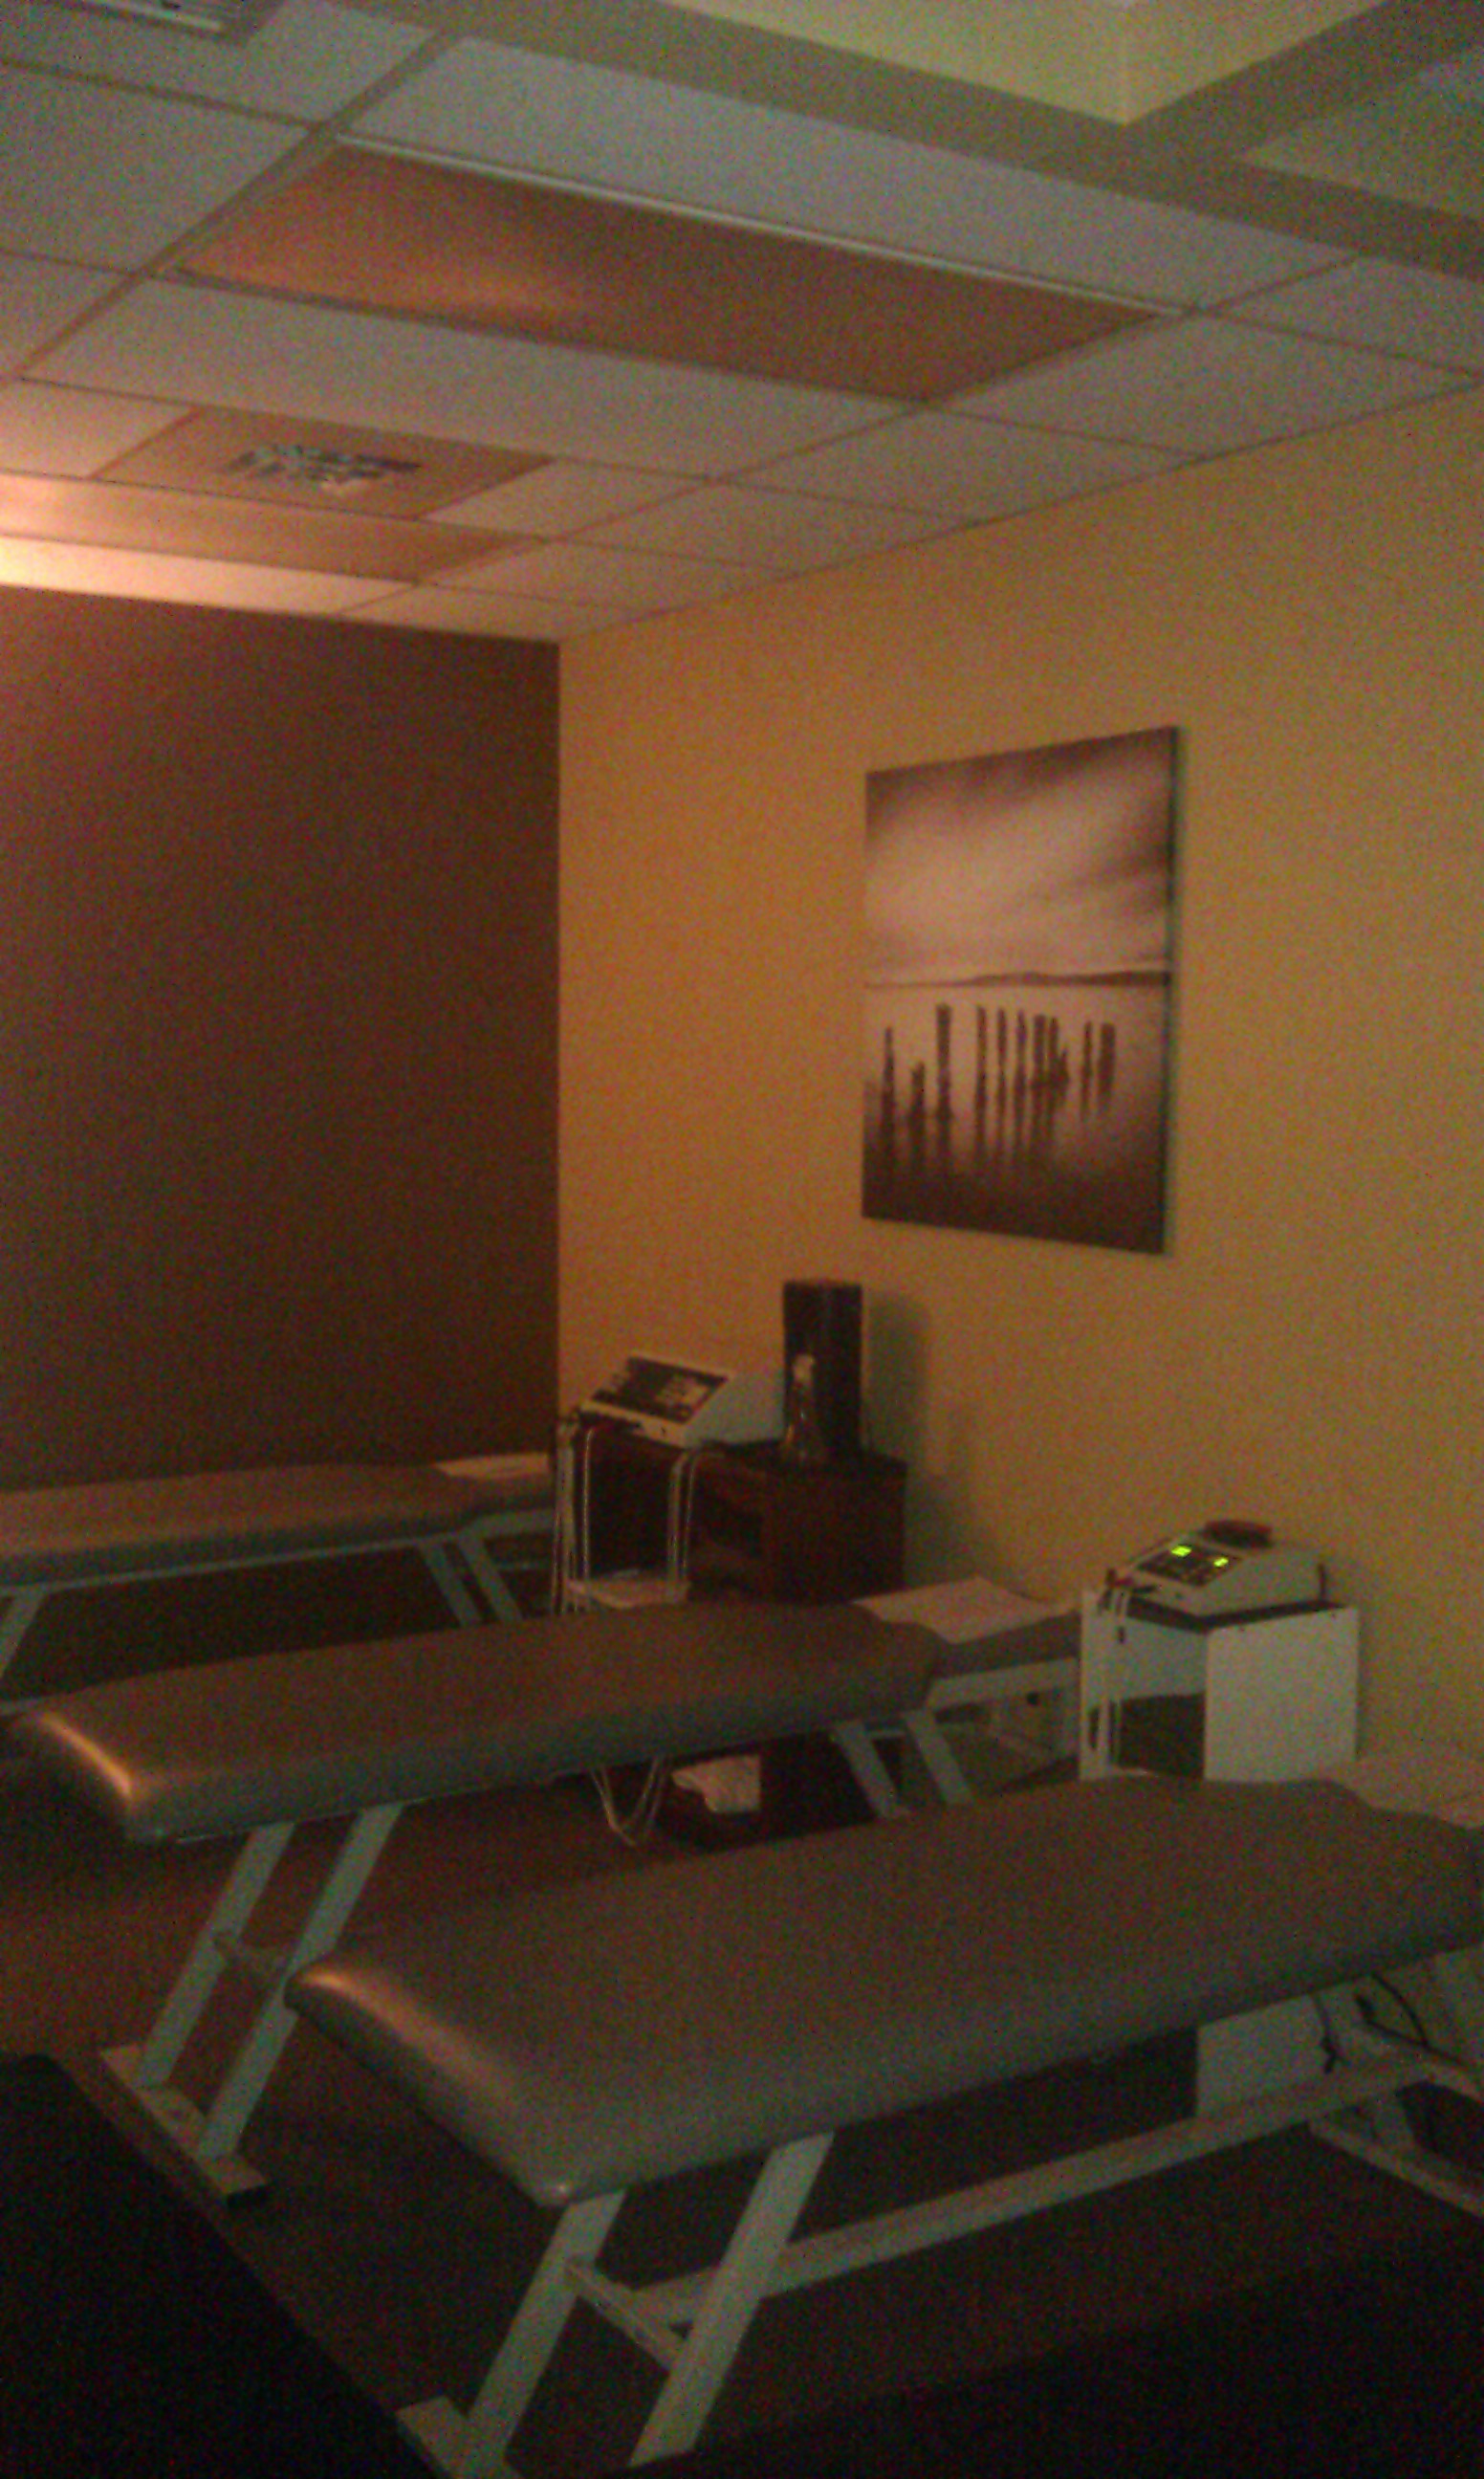 Back to Health Chiropractic & Massage Studios - Chiropractor in Richfield,  MN, USA :: Virtual Office Tour Back to Health Chiropractic & Massage  Studios - Chiropractor in Richfield, MN, USA